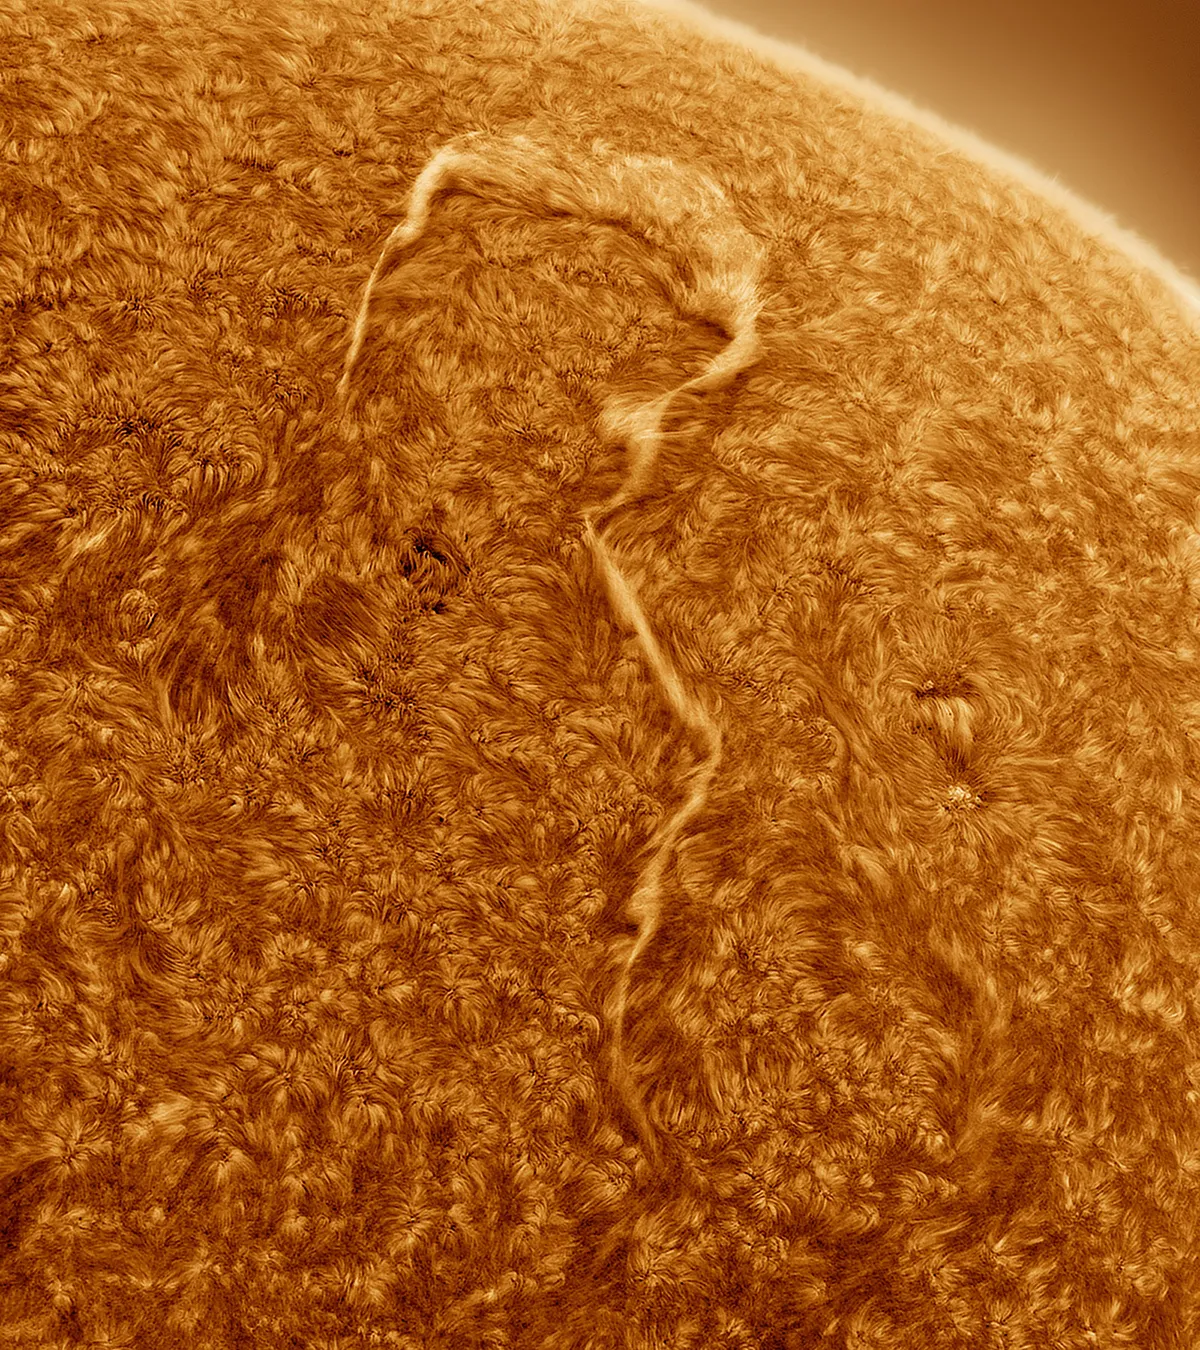 A Sun Question © Eduardo Schaberger Poupeau. Location: Rafaela, Santa Fe, Argentina. Winner, Our Sun category. Taken with a Sky-Watcher Evostar 150ED DX Doublet APO refractor telescope, Daystar Quark Chromosphere filter, Baader ERF frontal filter, iOptron CEM70G mount, Player One Apollo-M Max camera, Gain 100, 840 mm focal length 120 mm aperture, 2 panels of 115 x 3.47-millisecond exposures